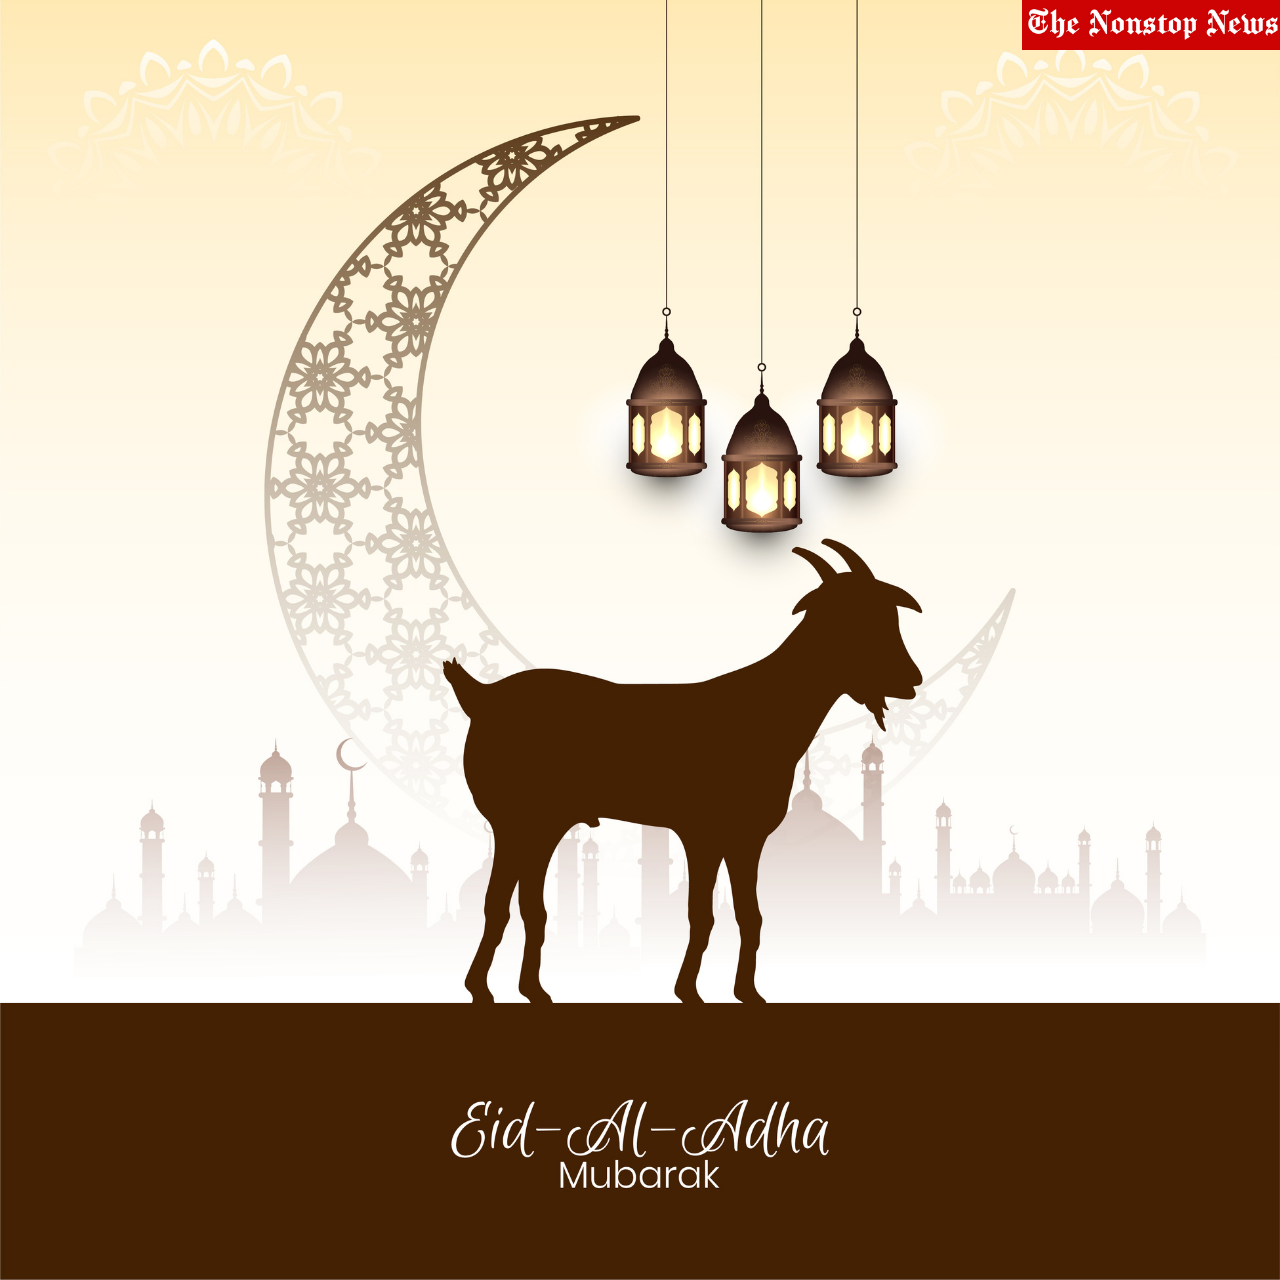 Bakrid Mubarak 2021 Wishes, Images, Quotes, Shayari, Greetings, Status, PNG, Wallpaper, Messages, and Dua to greet your Friend, Relative or Loved Ones